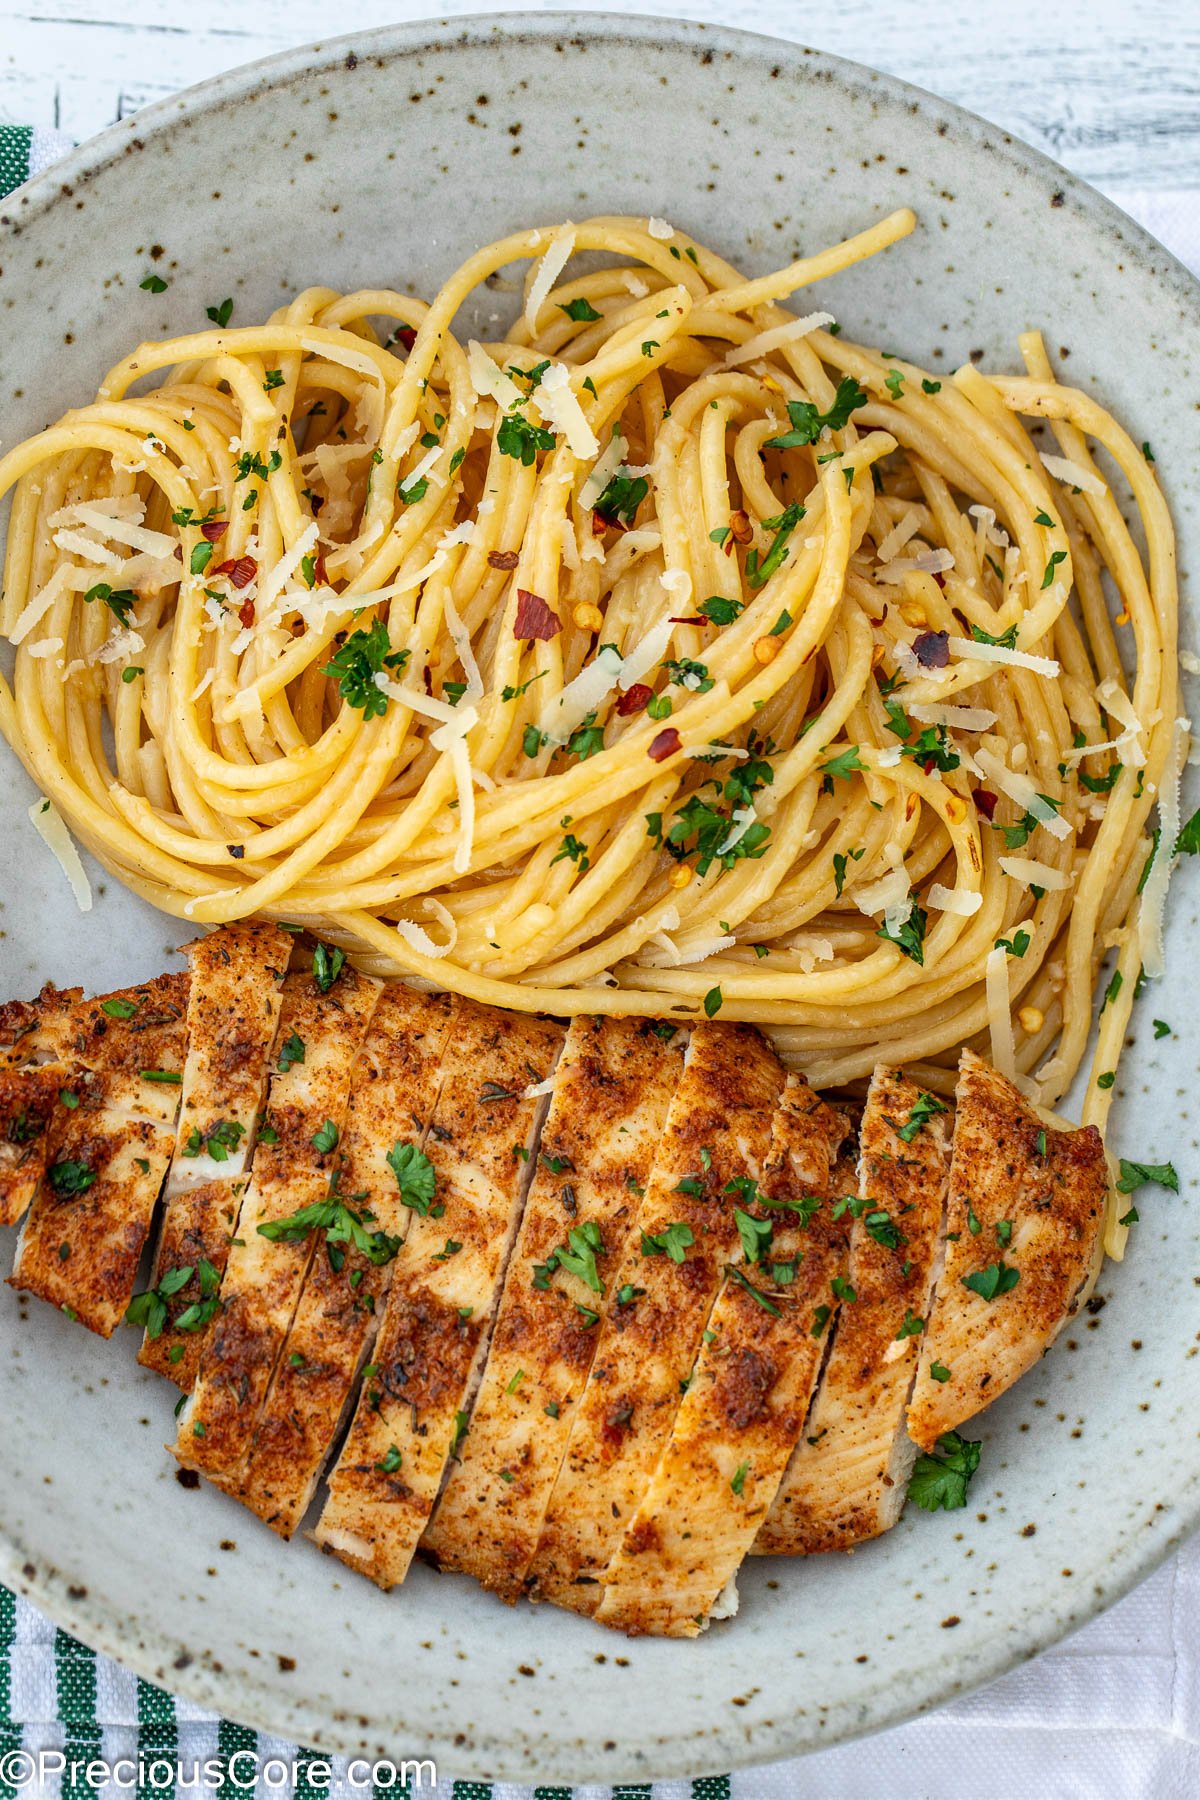 Garlic butter pasta and chicken breast in a bowl.